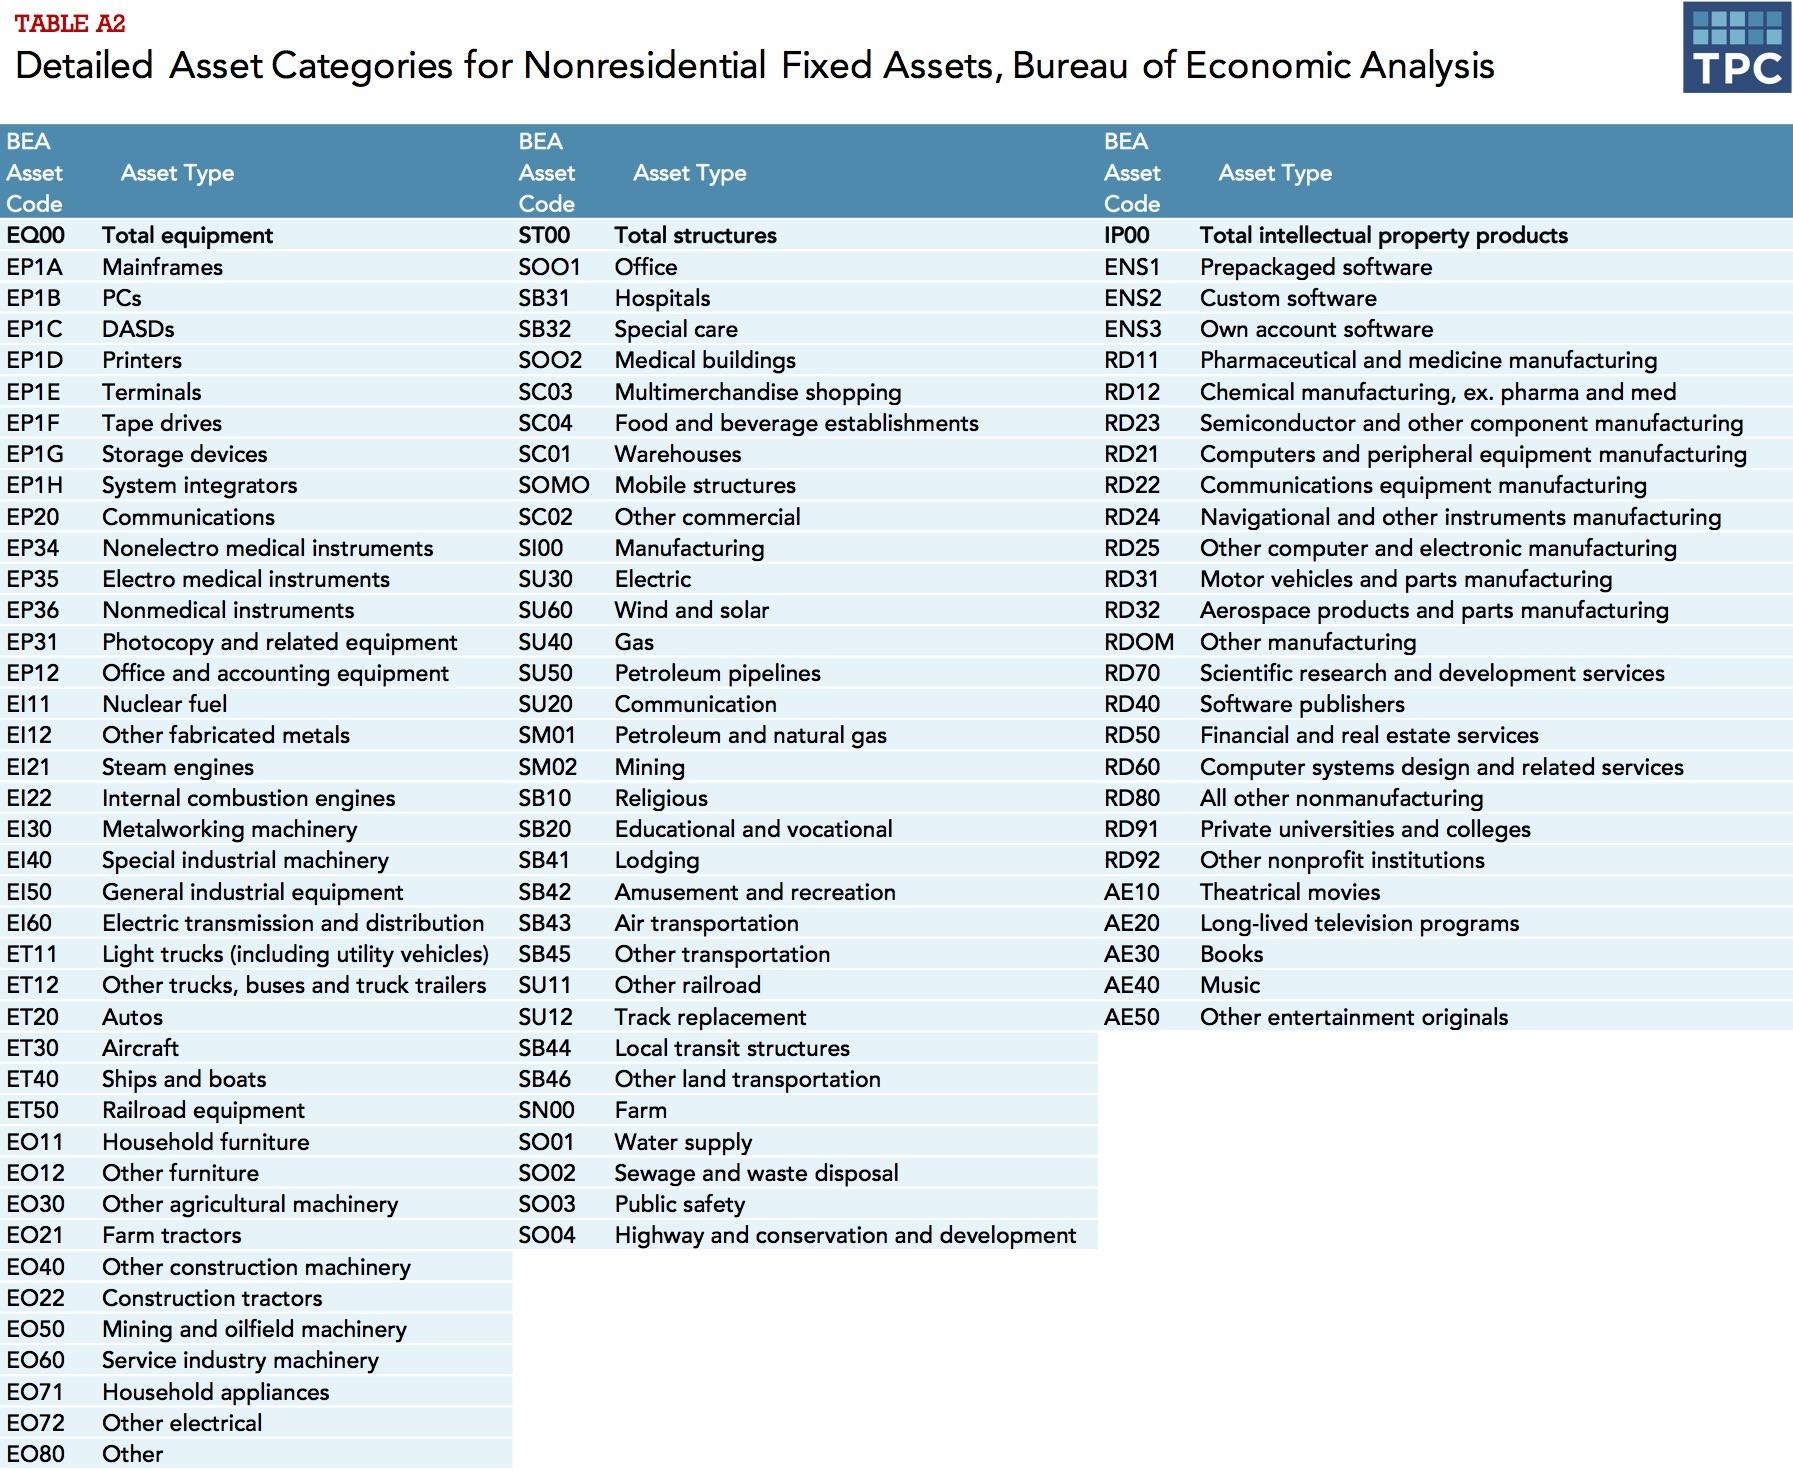 Detailed Asset Categories for Nonresidential Fixed Assets, Bureau of Economic Analysis